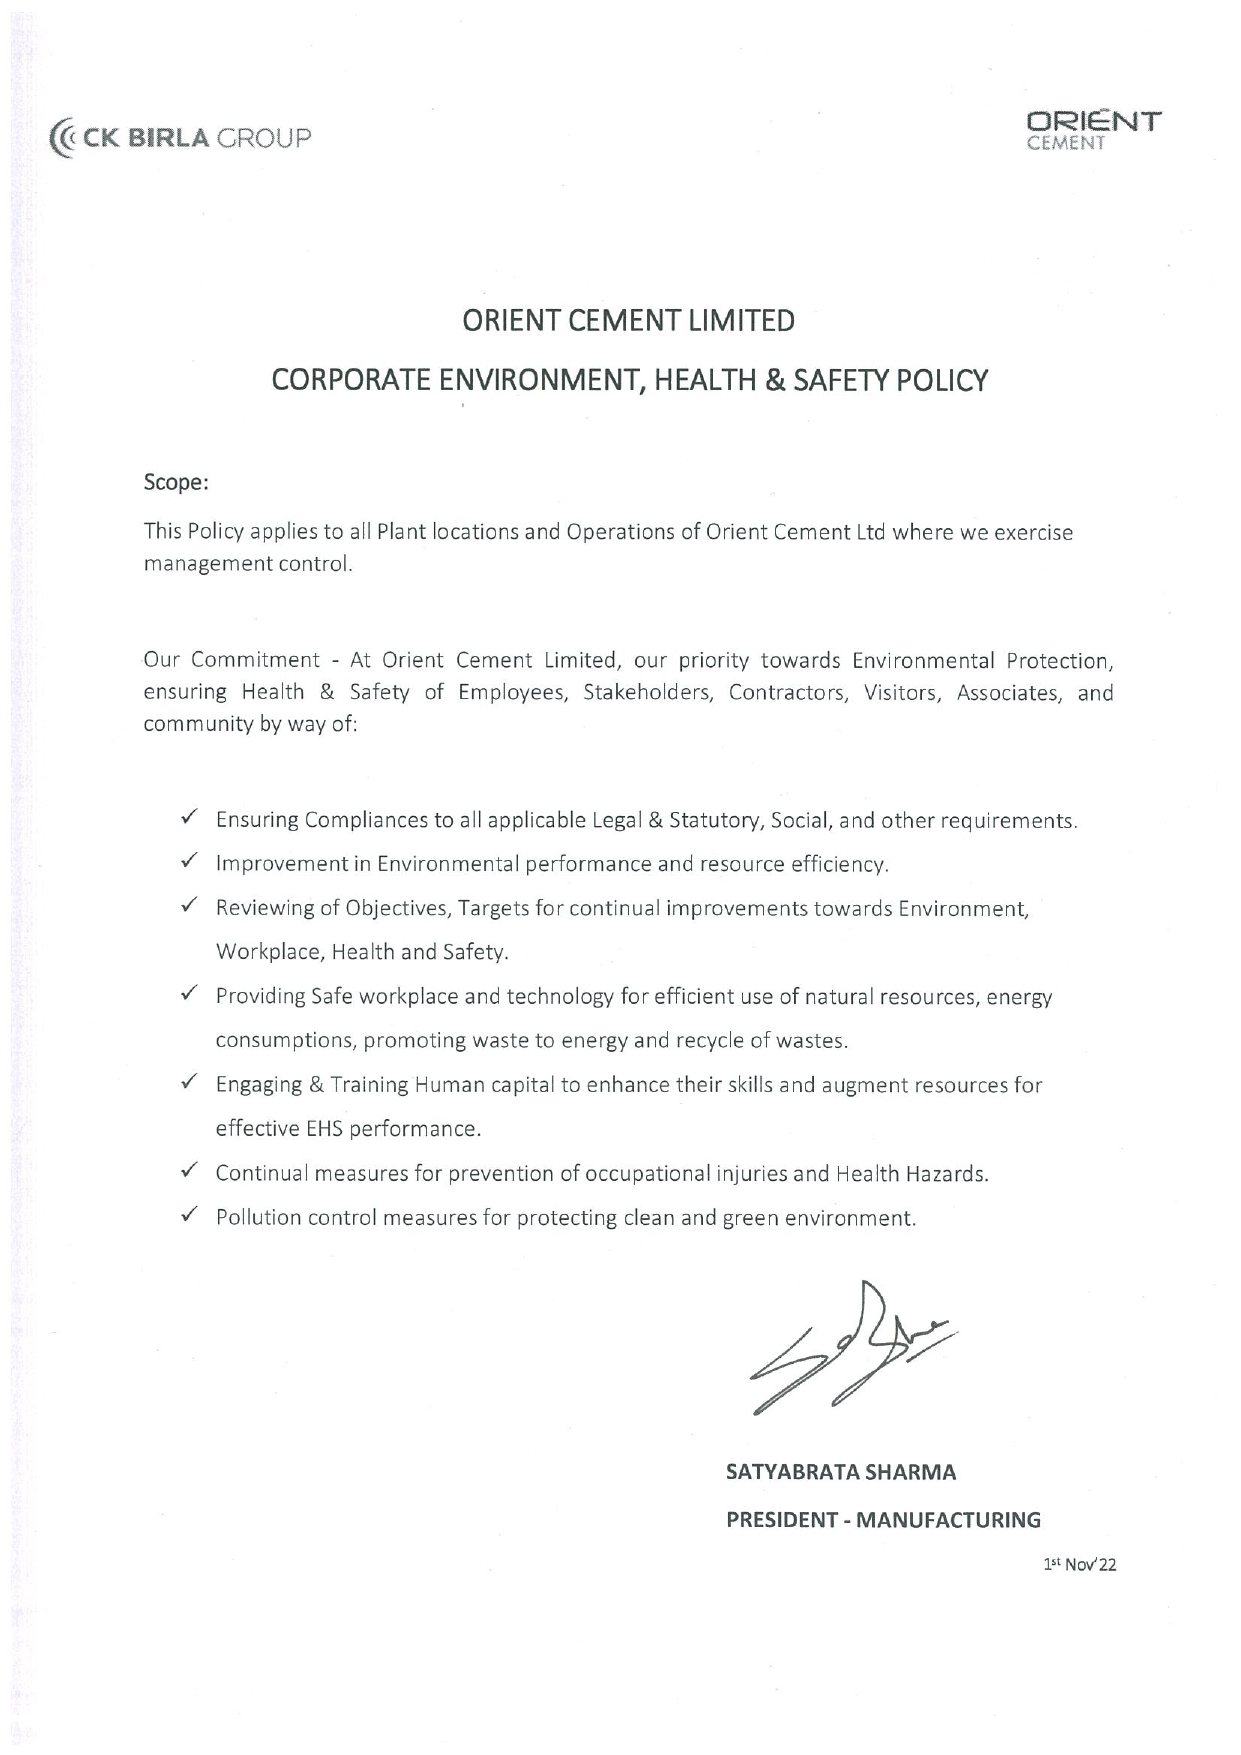 Corporate Environment, Health and Safety (EHS) Policy